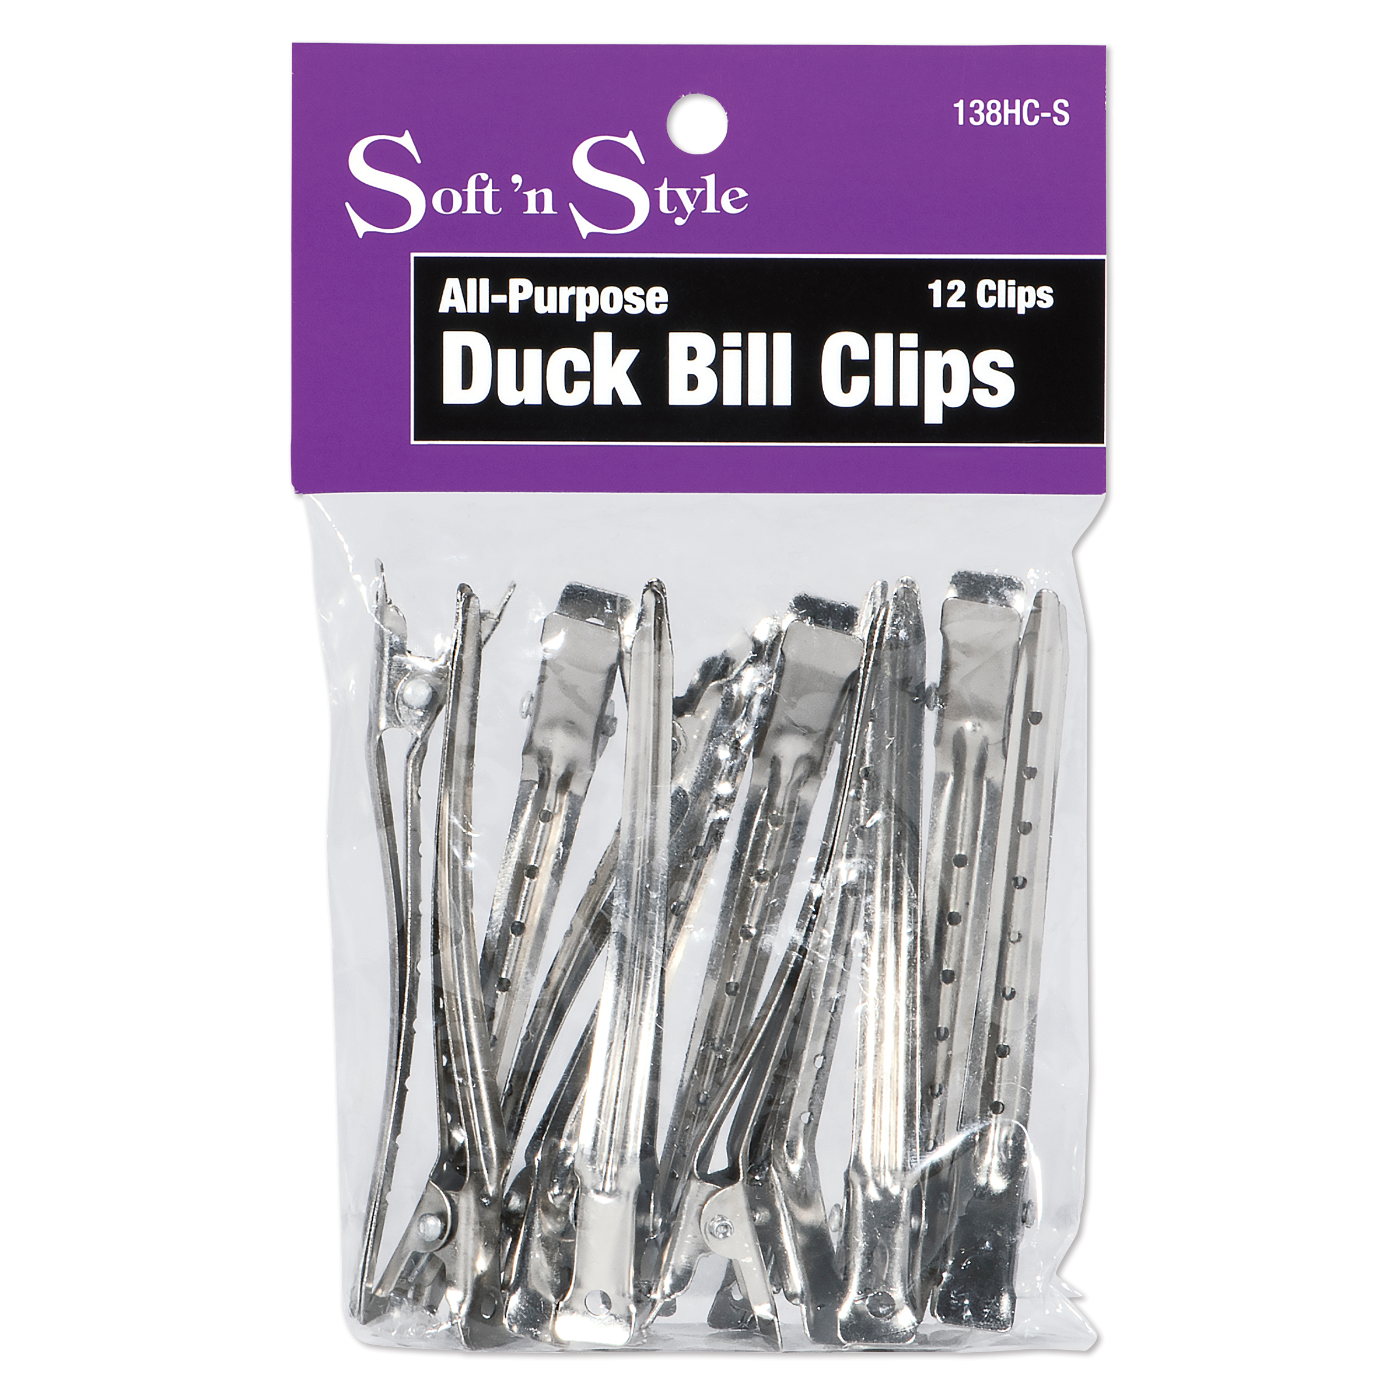 All Purpose Duck Bill Clips, Bag of 12